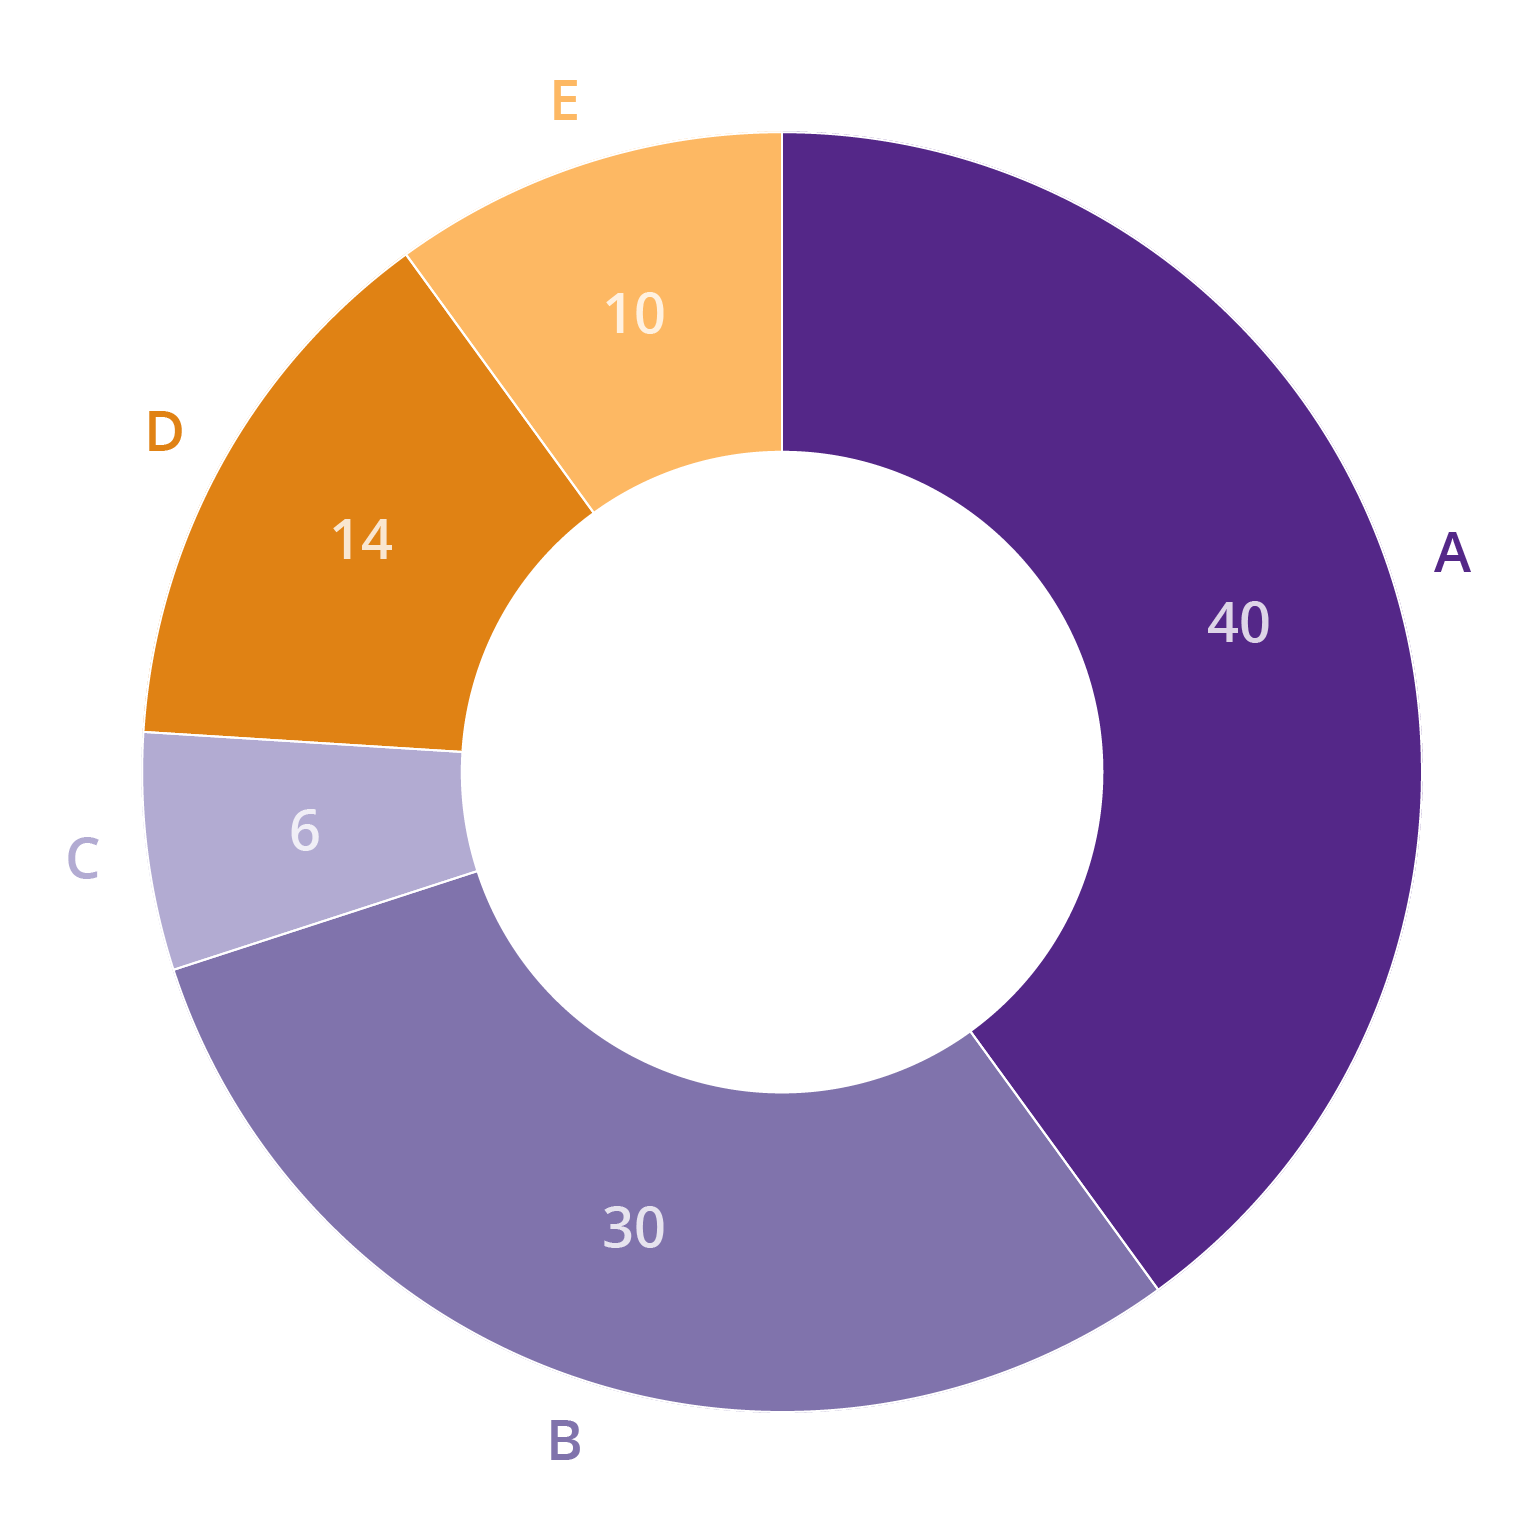 A donut chart with 5 slices. 3 of the slices are coloured in tones of purple, and together they amount to just over three quarters of the pie